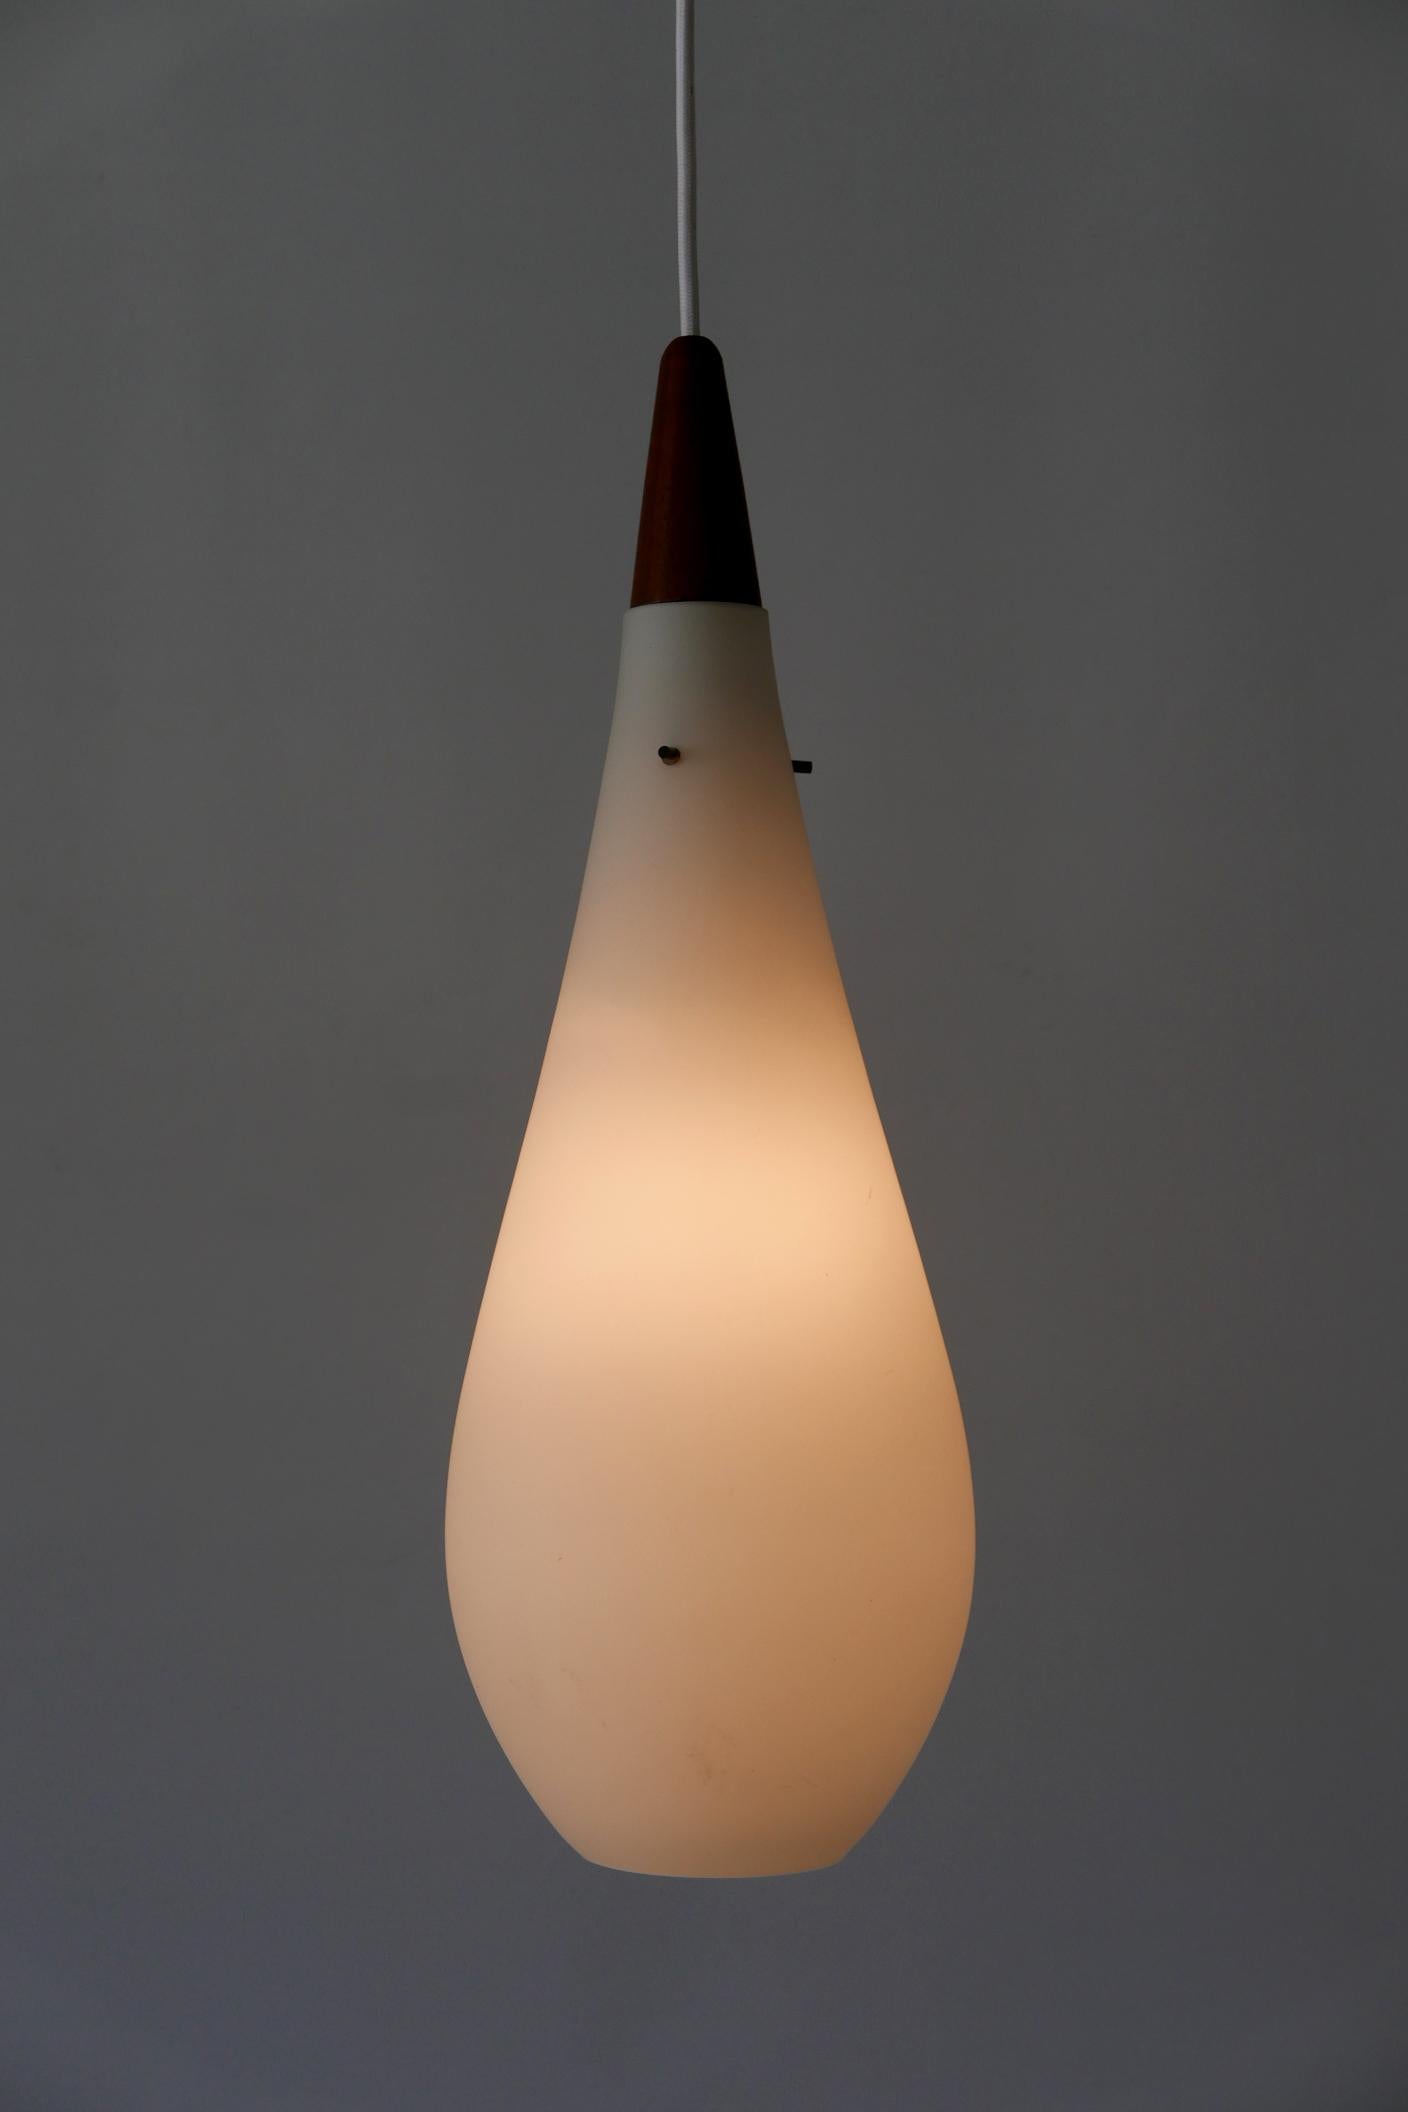 Lovely Mid-Century Modern Opaline glass and teak pendant lamp or hanging light. Designed and manufactured probably in Denmark in 1960s.

Executed in Opaline glass and teak wood, the lamp comes with 1 x E14 / E12 Edison screw fit bulb holder, is